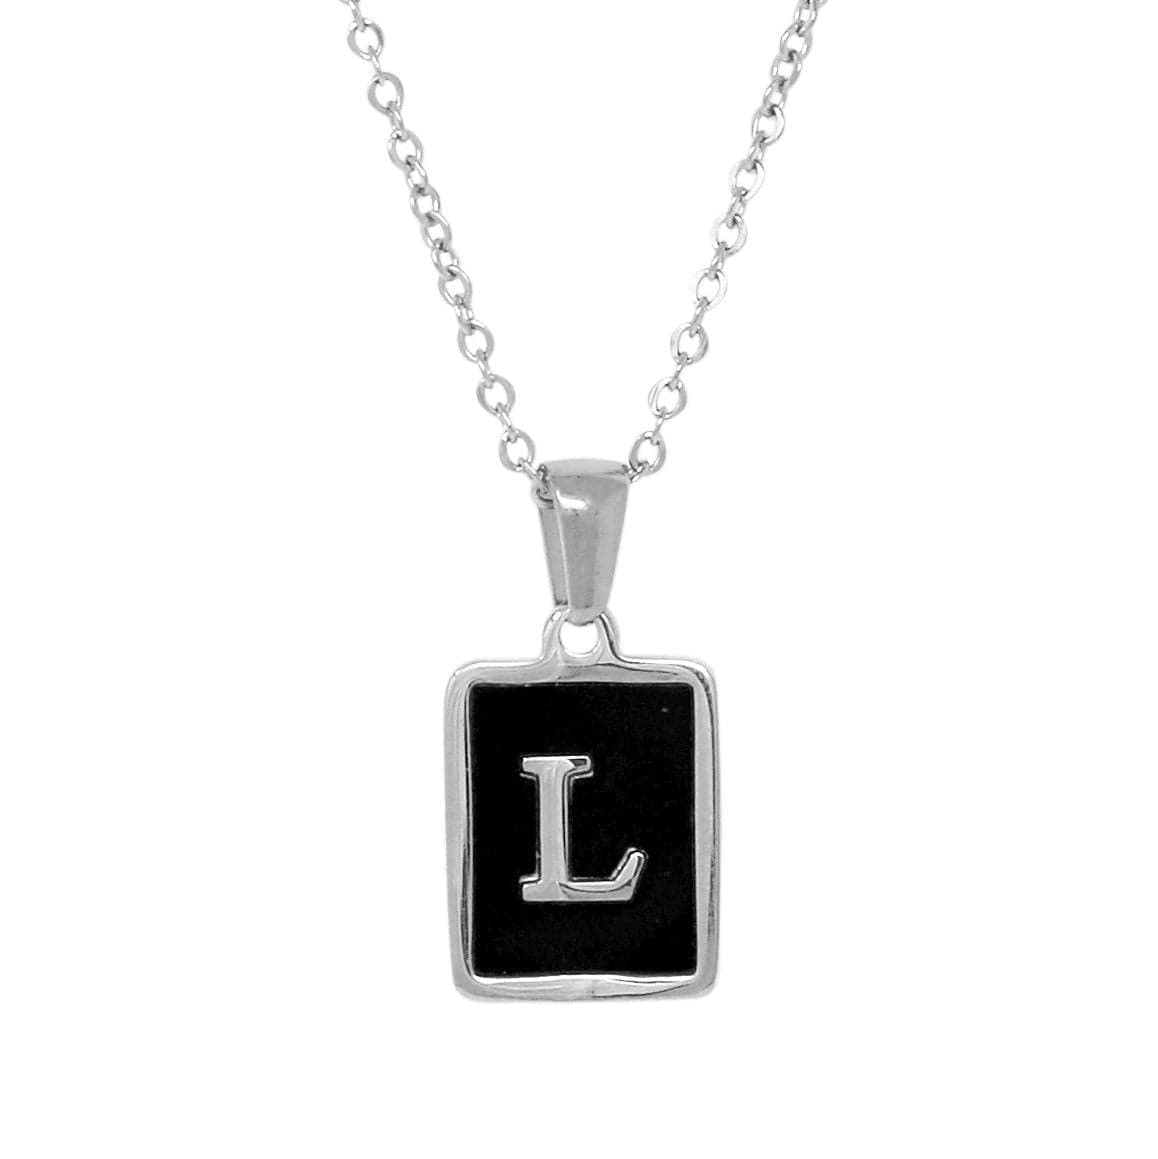 BohoMoon Stainless Steel Raven Initial Necklace Silver / A